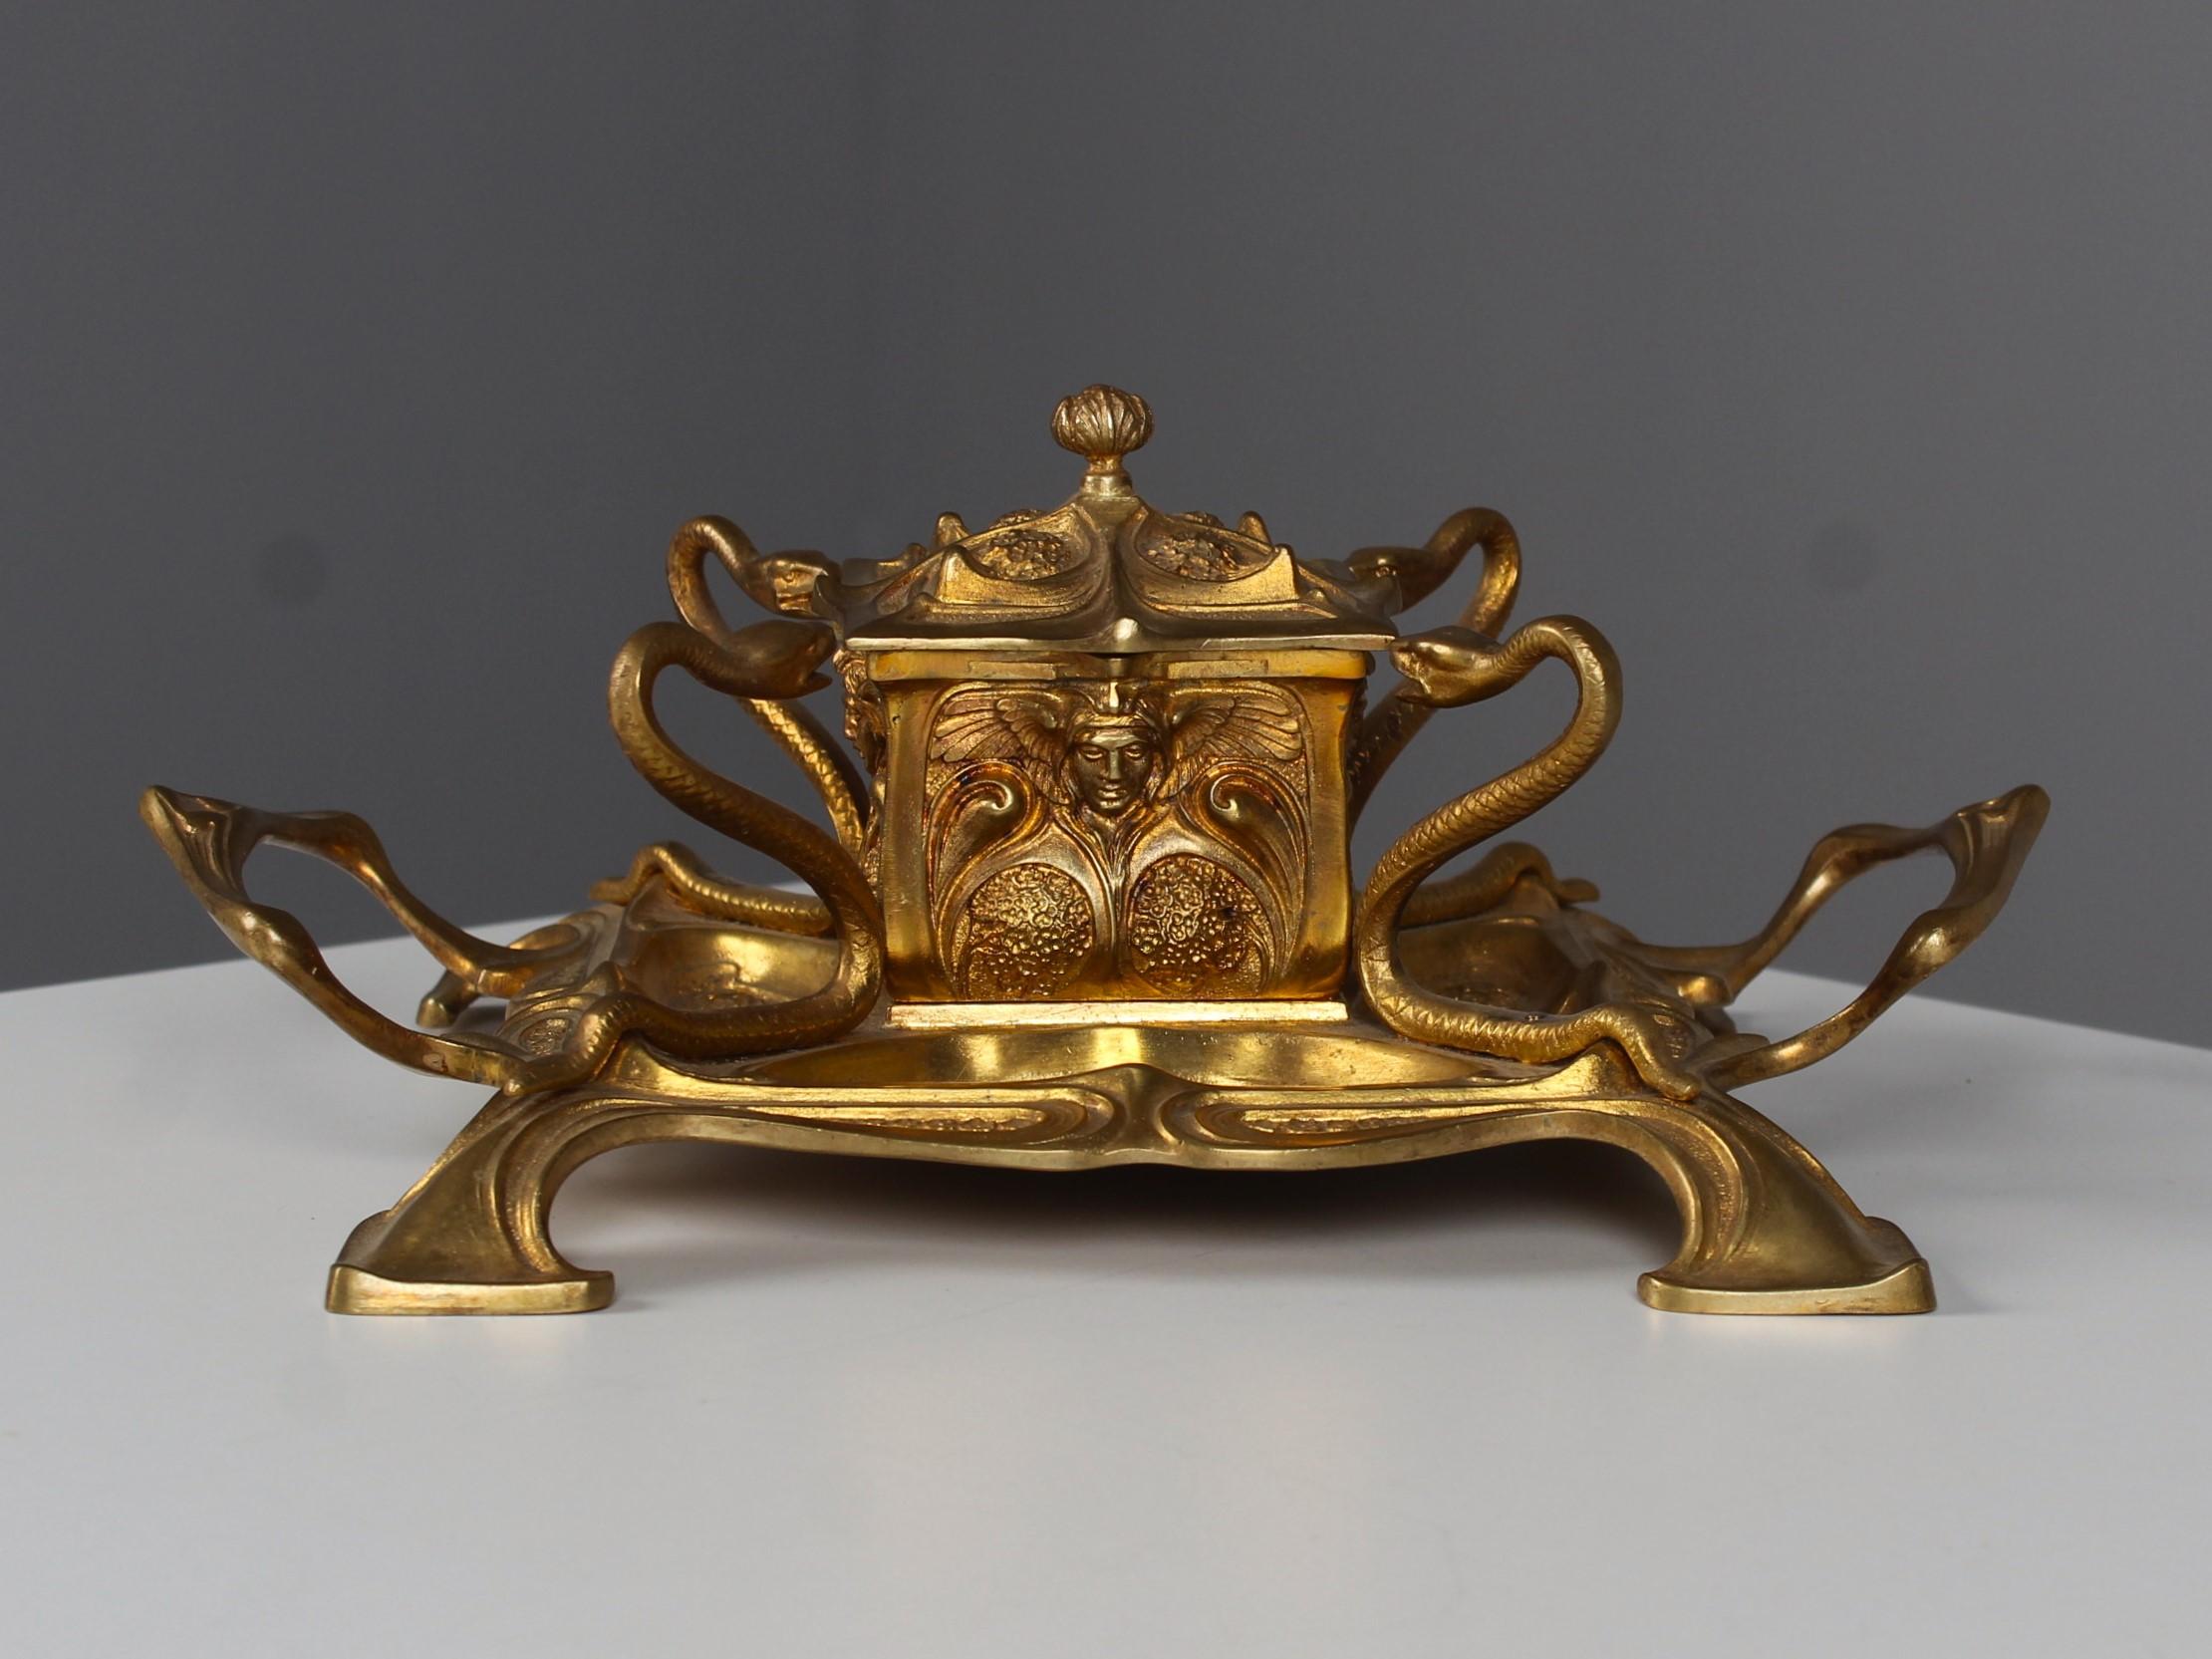 Exceptional Art Nouveau Inkwell from France, 1900- 1920s.
The square inkwell in the center is guarded by four snakes at each of its corners. The lid, made of curved Art Nouveau ornaments, reveals the original glass inkpot when opened.
On each side